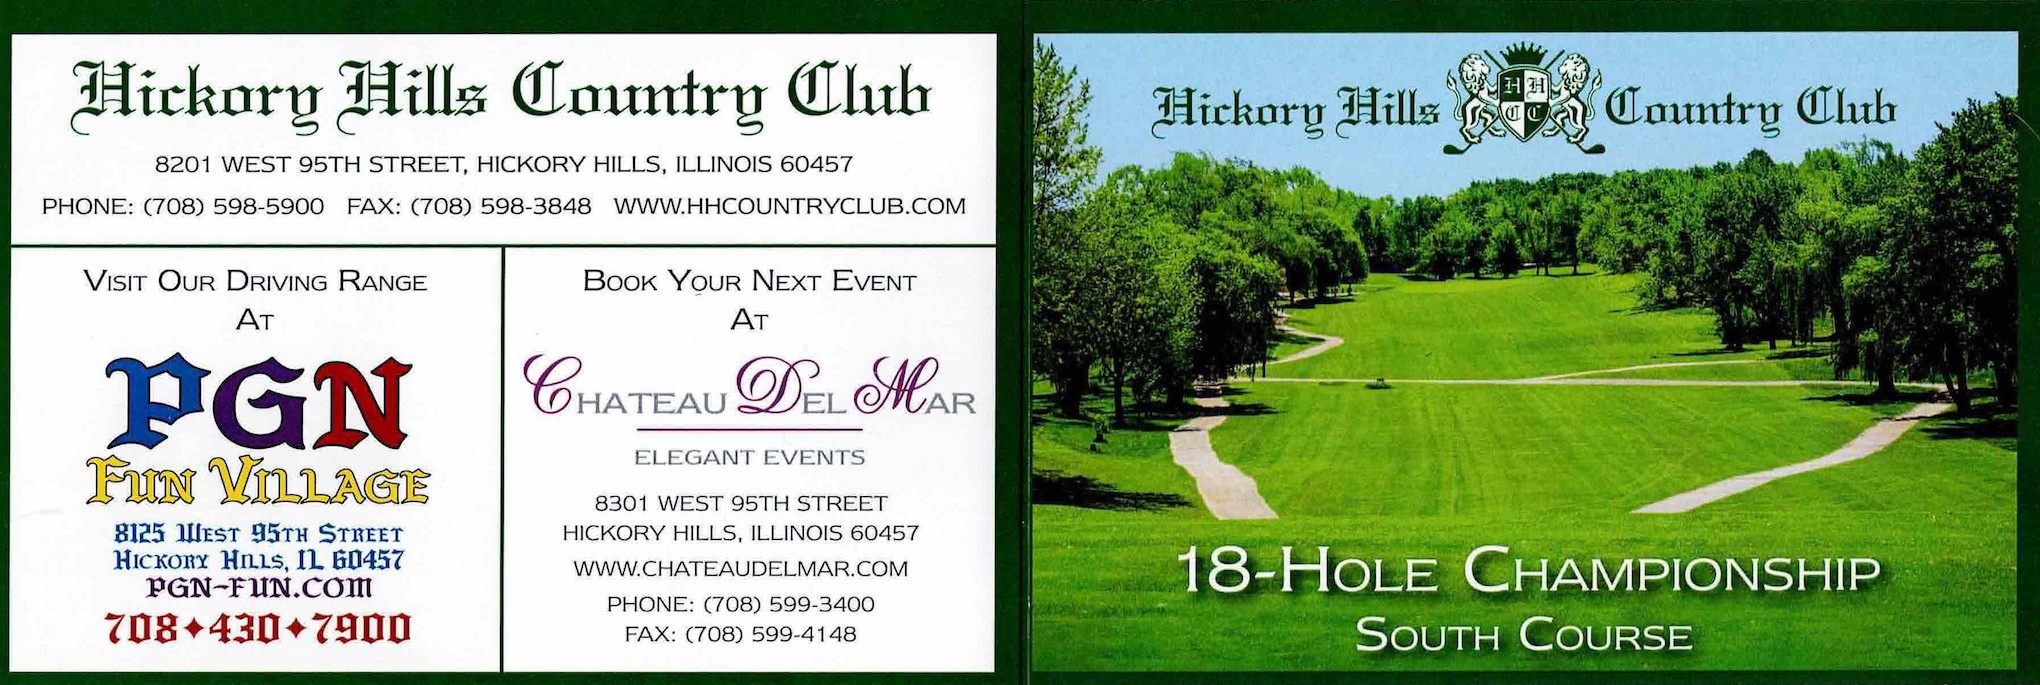 Scan of the scorecard from Hickory Hills Country Club in Hickory Hills, Illinois. 